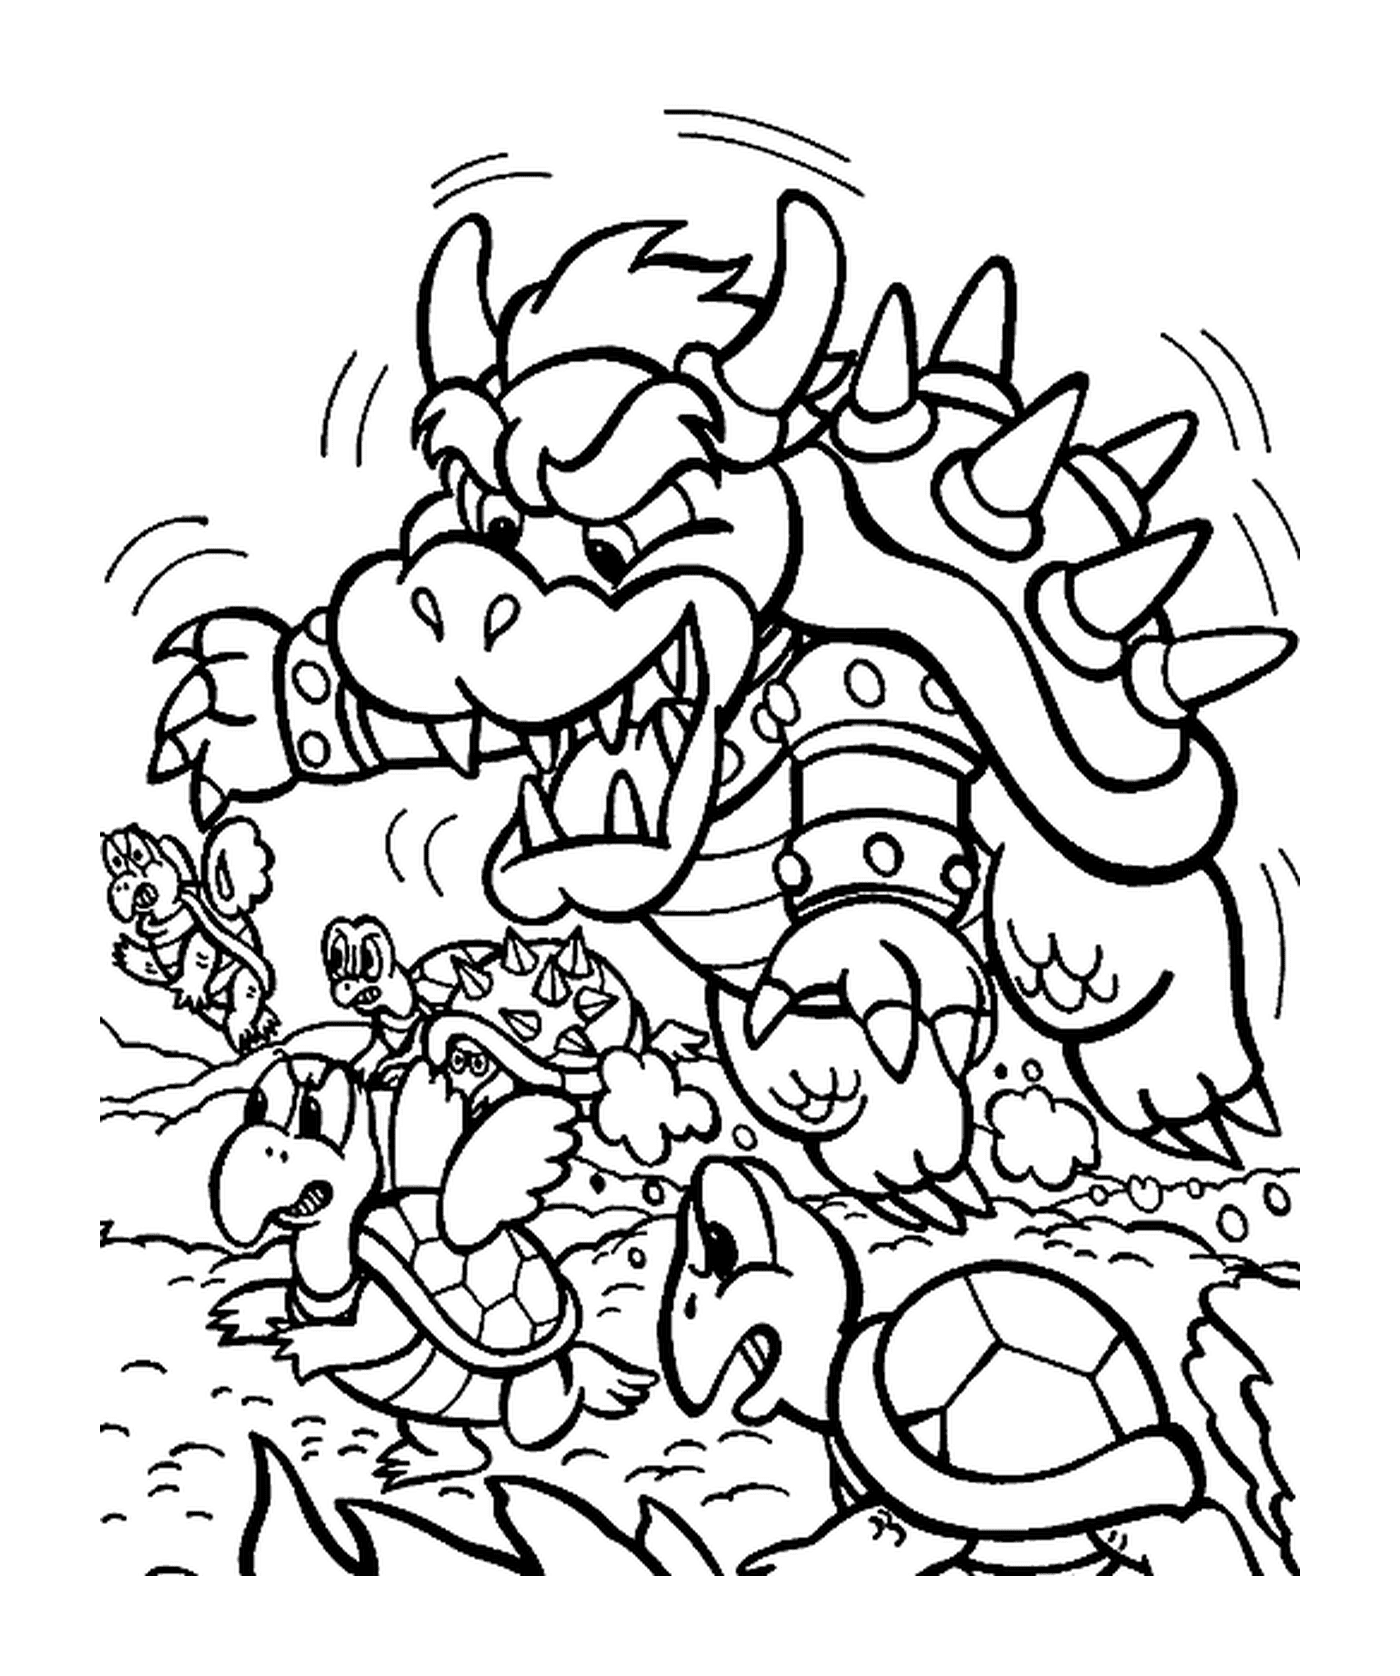  Bowser, the bad guy in history 